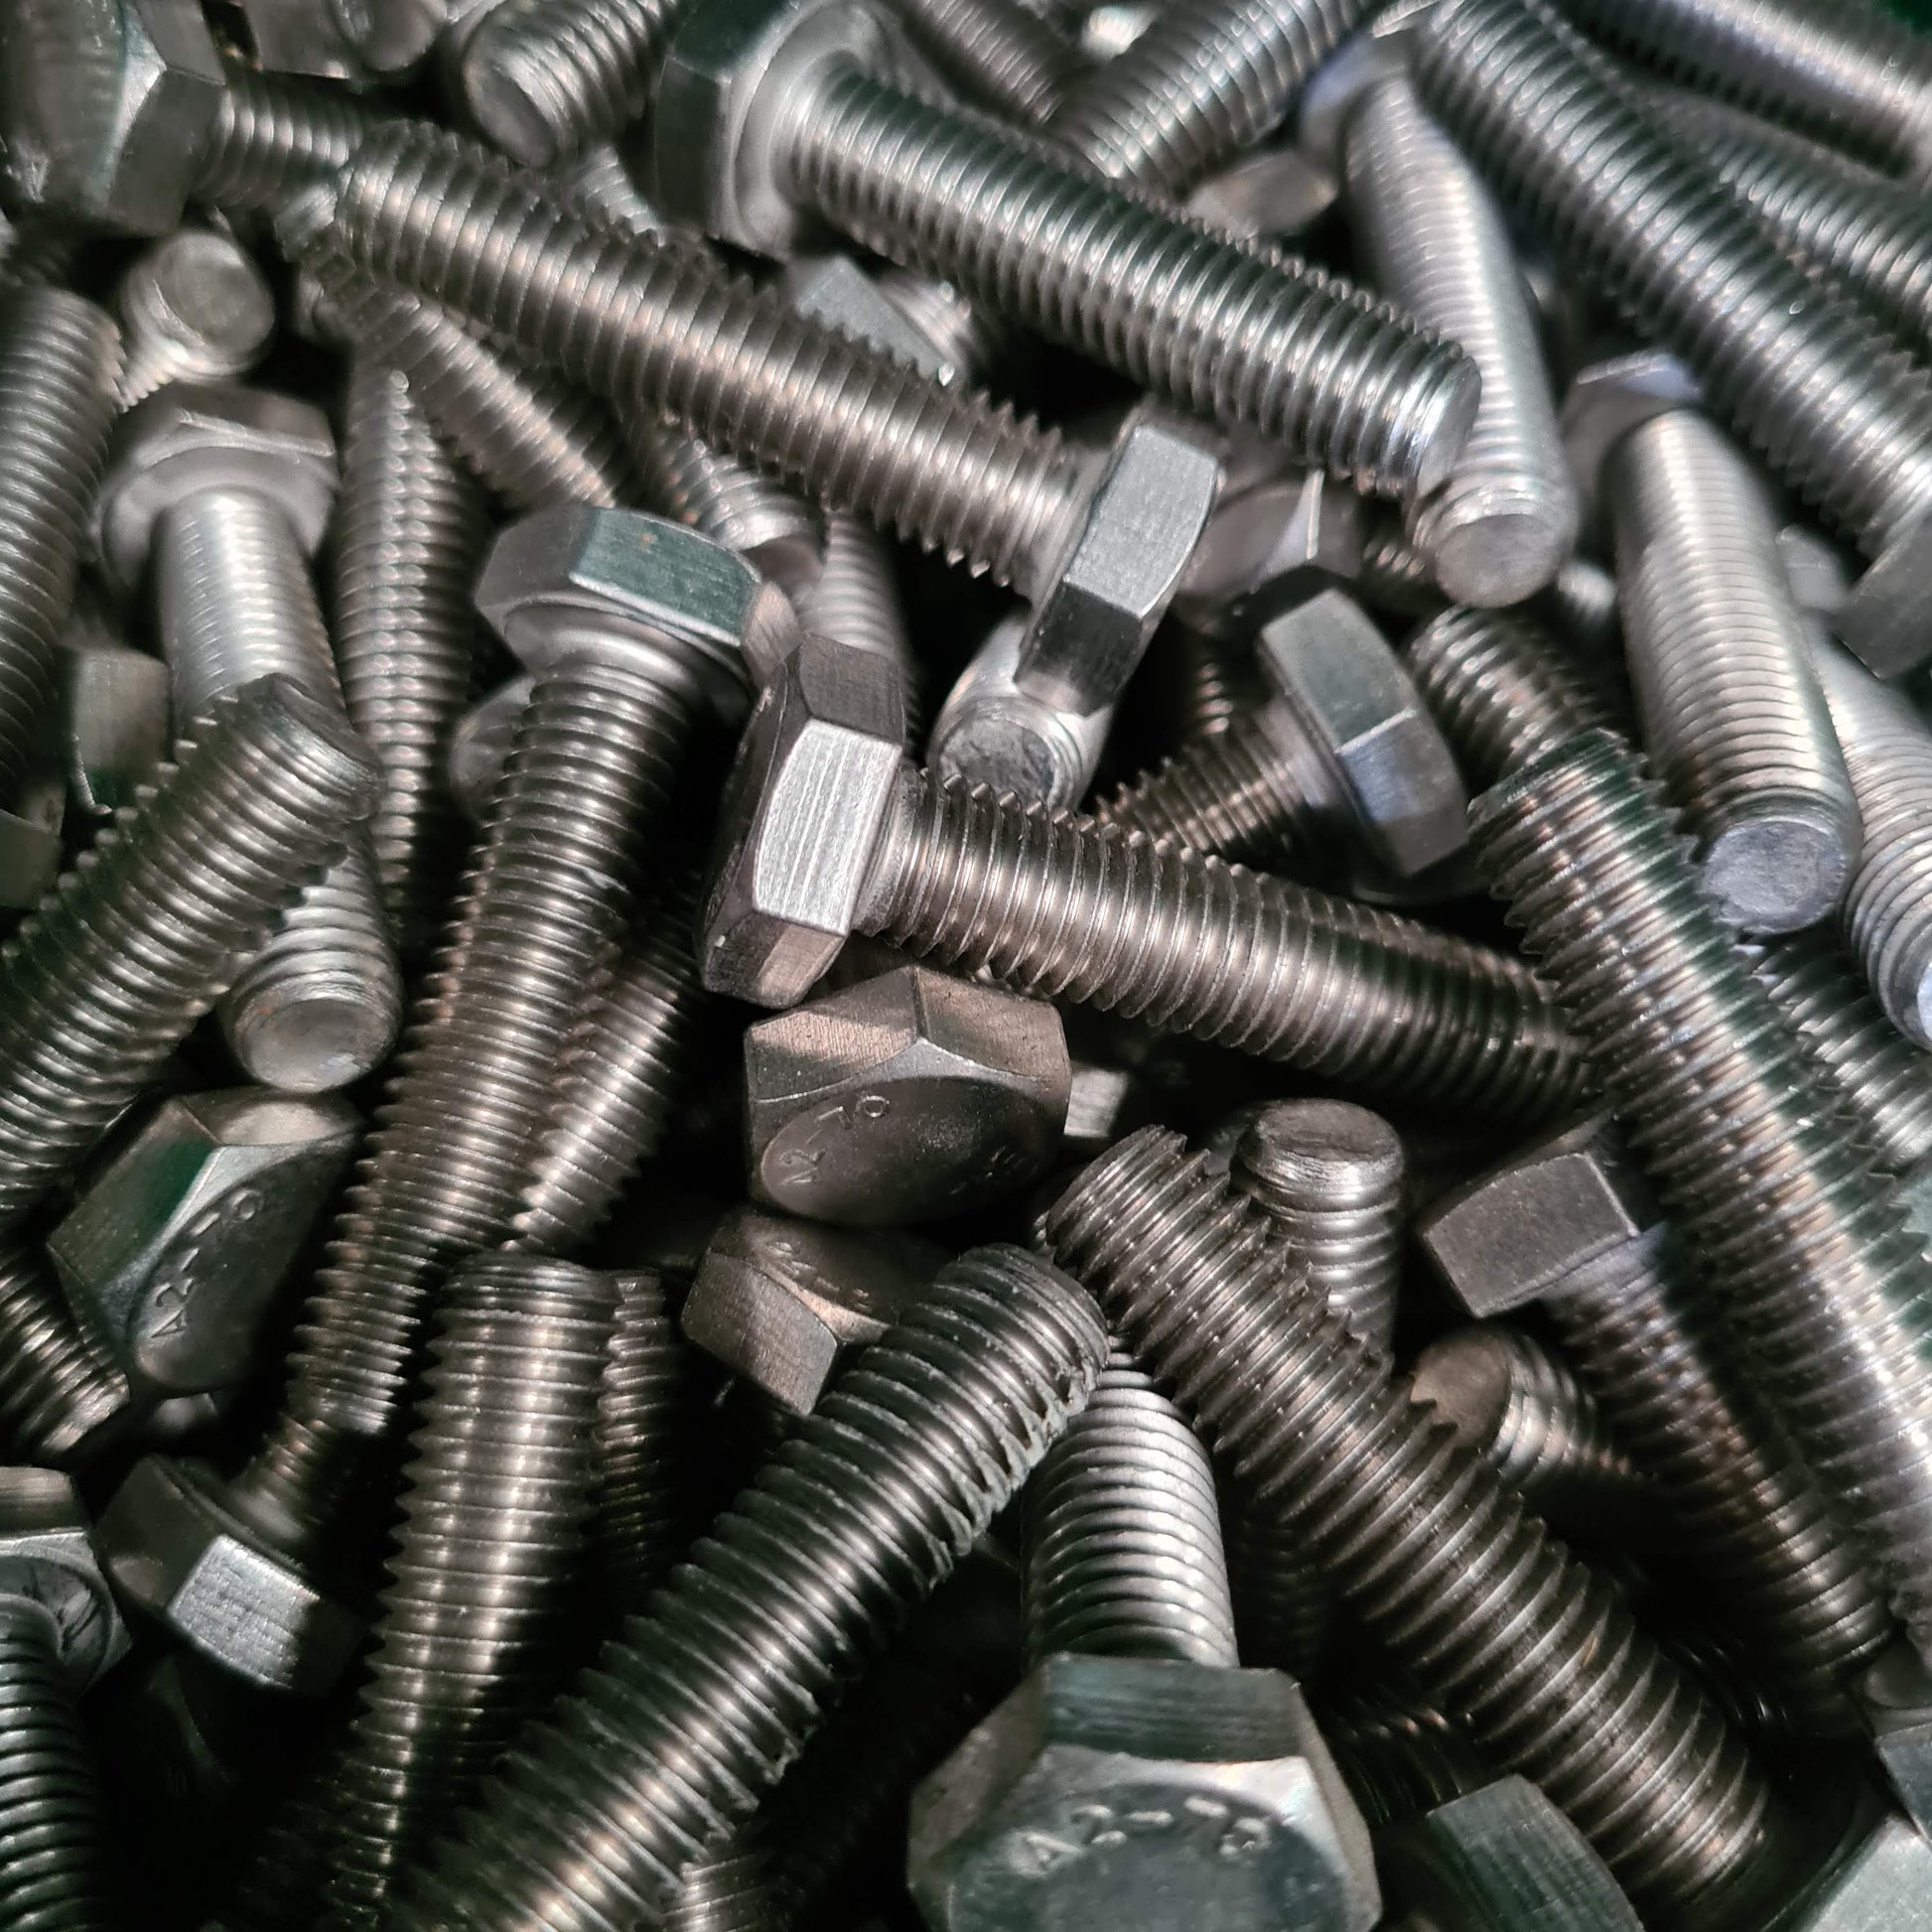 M3 Set Screw available in 316 and lengths from 6mm to 30mm